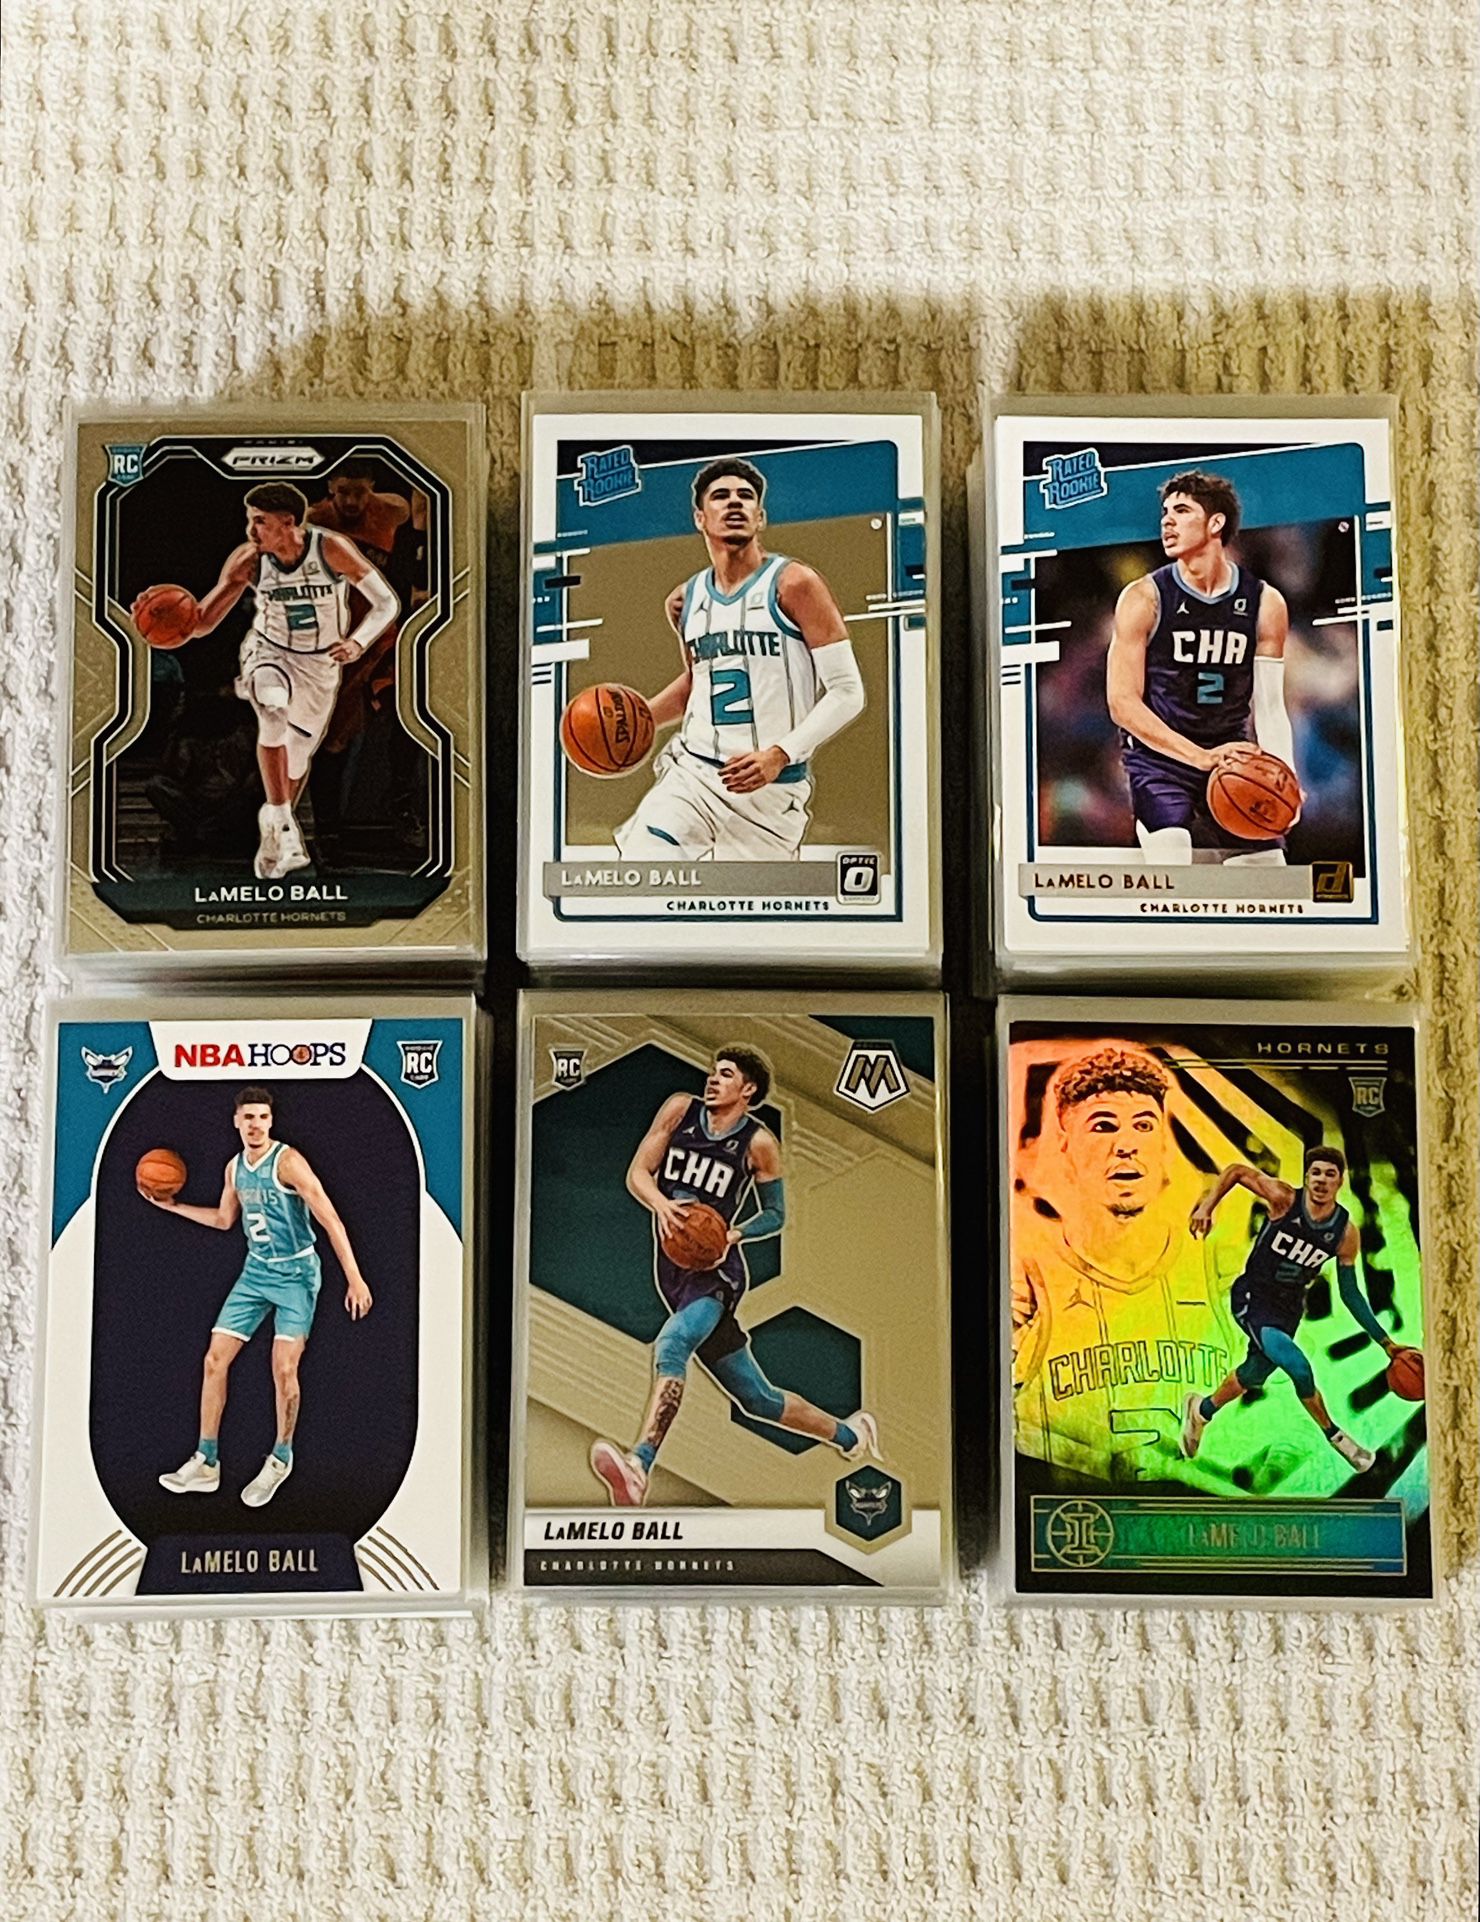 Charlotte Hornets 375 Card Basketball Lot! Rookies, Prizms, Parallels, Short Prints, Variations & More!